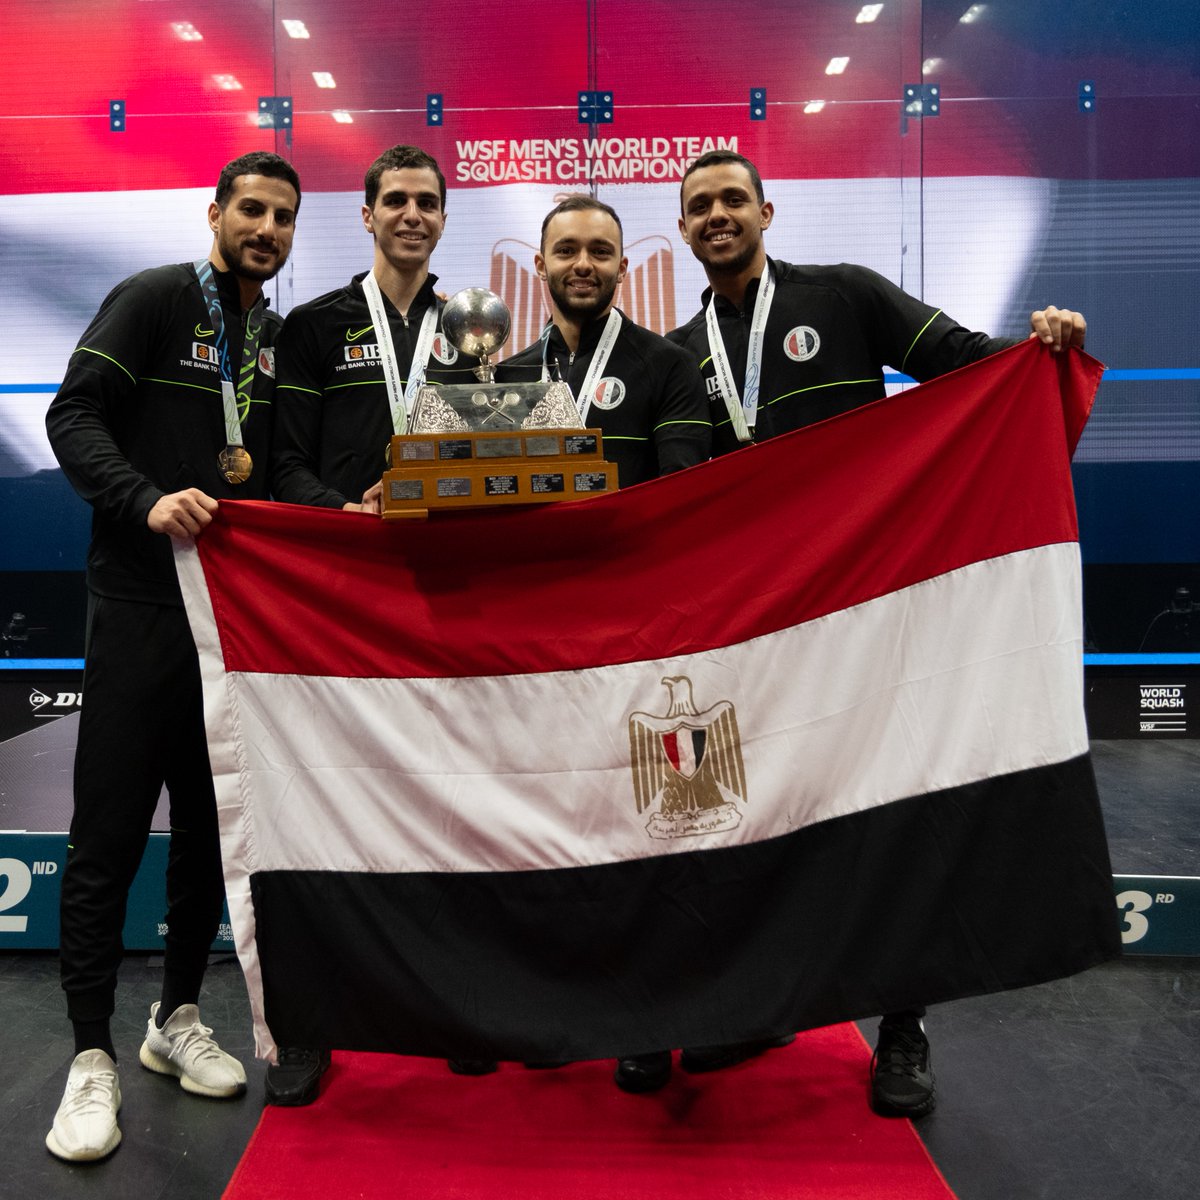 🏆🏆🏆 A third title in a row for Egypt! 🇪🇬 Egypt win an entertaining final against England to defend their WSF Men's World Team Championship crown 📝 Report and reaction from New Zealand ⬇️ wsfmensteams.com/egypt-win-2023…